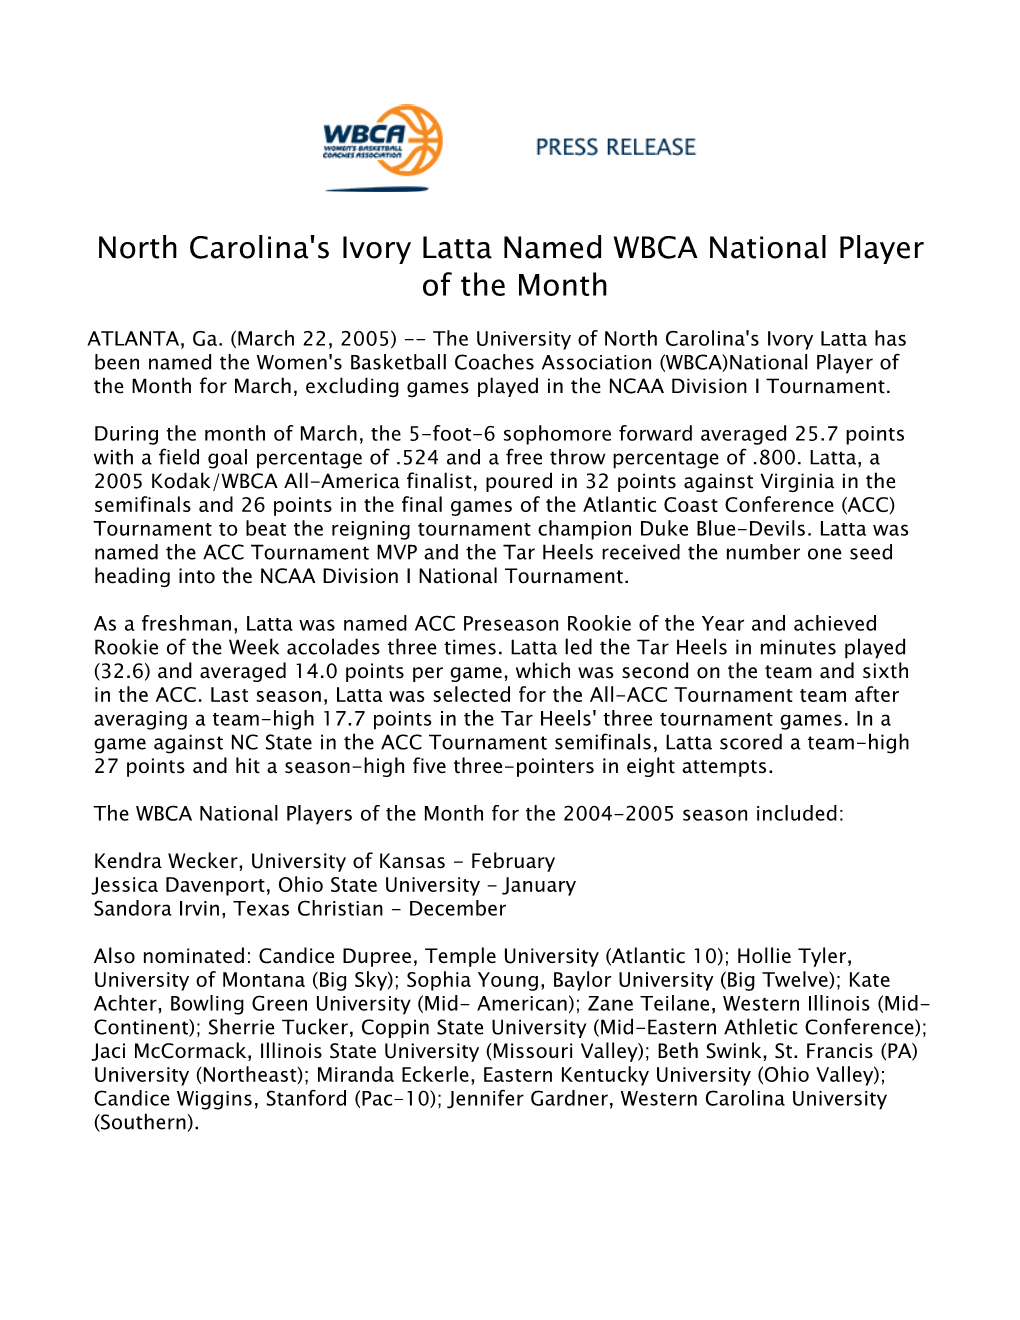 North Carolina's Ivory Latta Named WBCA National Player of the Month